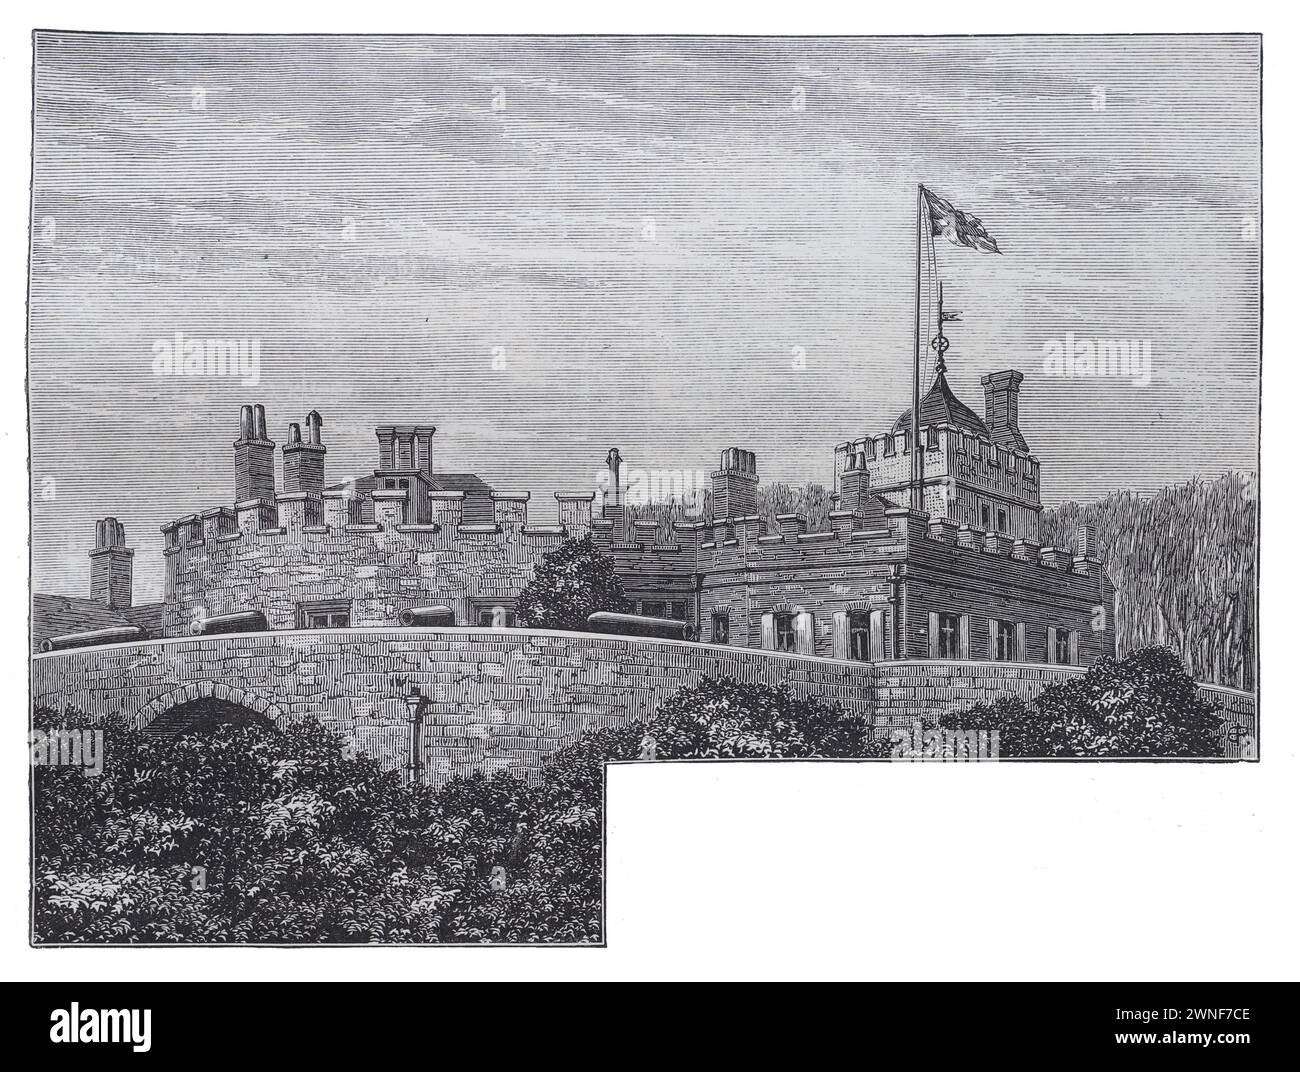 Walmer Castle, Kent; 19th century; Black and white illustration from 'Our Own Country' a Descriptive, Historical and Pictorial guide to the UK published in late 1880s by Cassell, Petter, Galpin & Co. Historic pictures of Briatin. Stock Photo